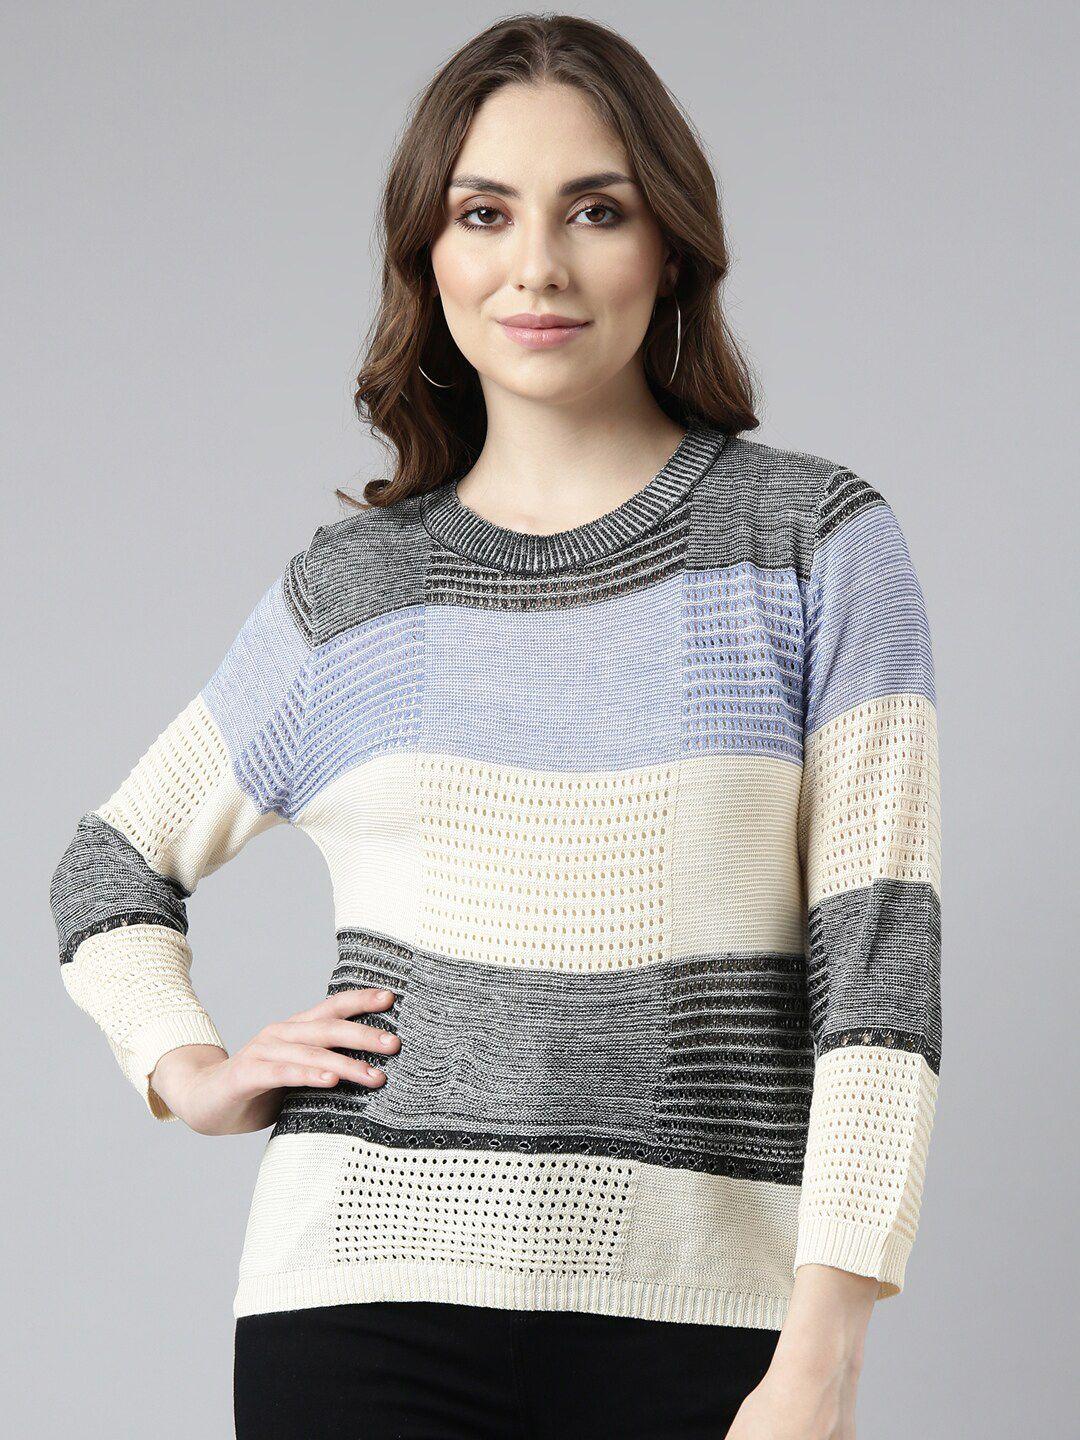 showoff striped round neck extended sleeves crochet top